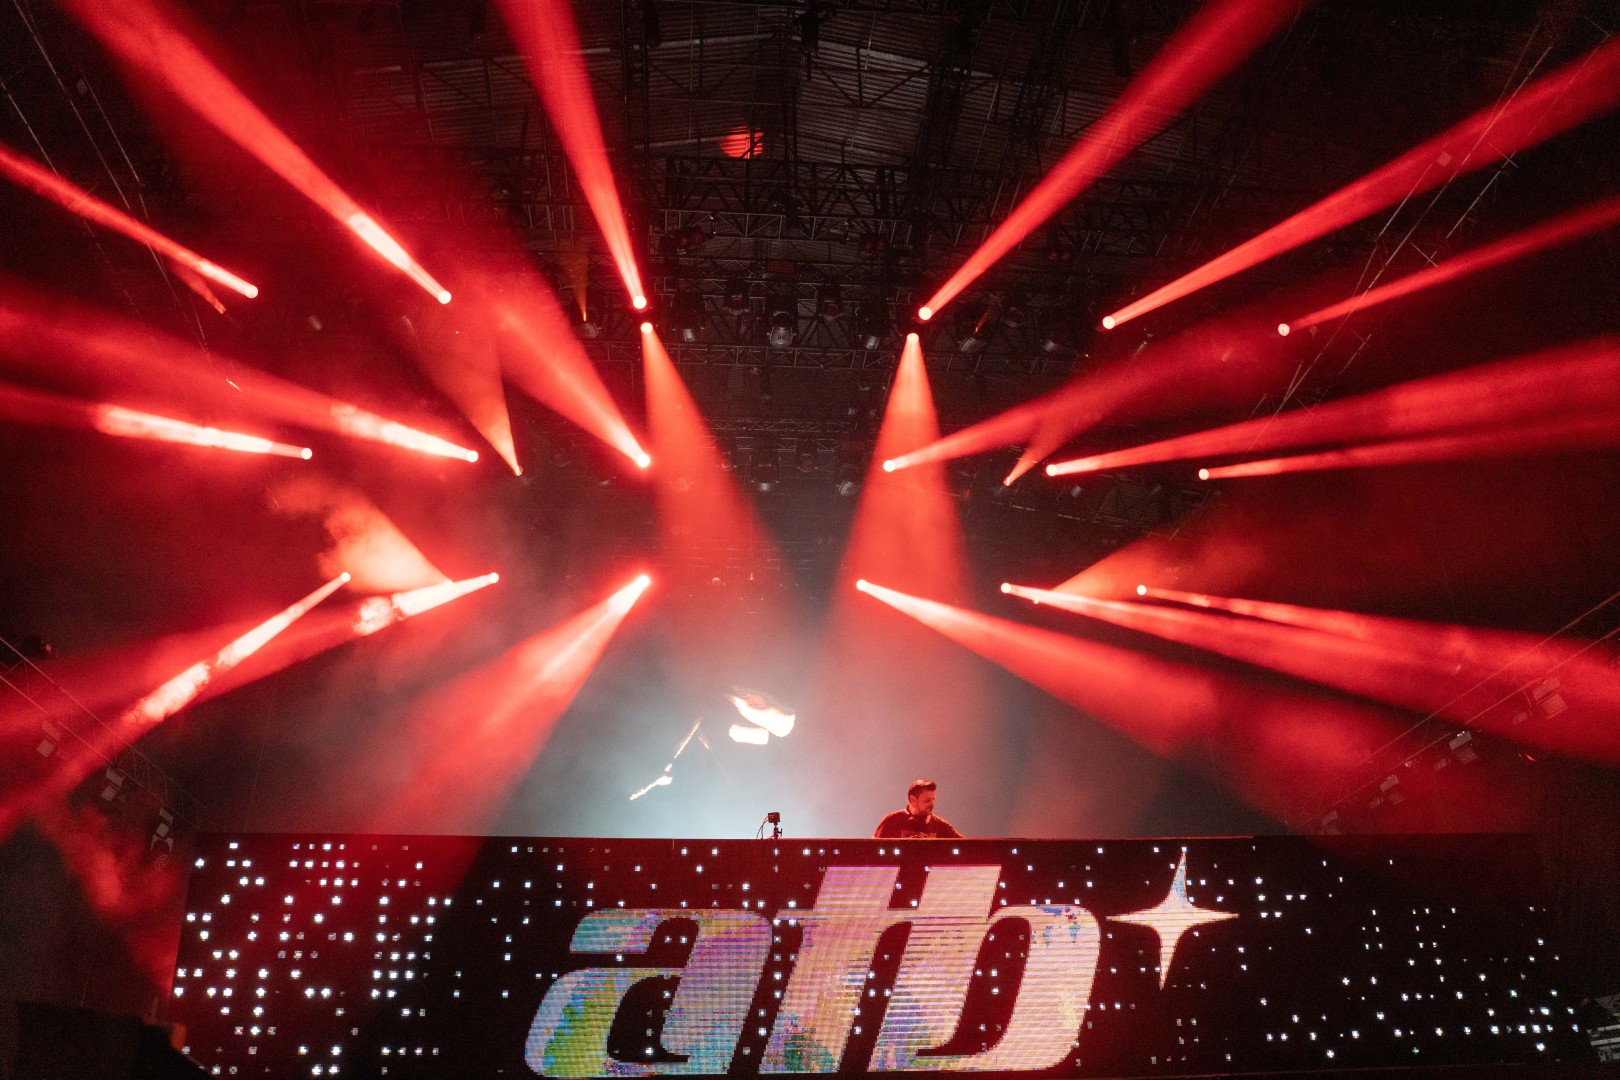 ATB at Cluj Arena in Cluj-Napoca on August 8, 2022 (790c259b9e)